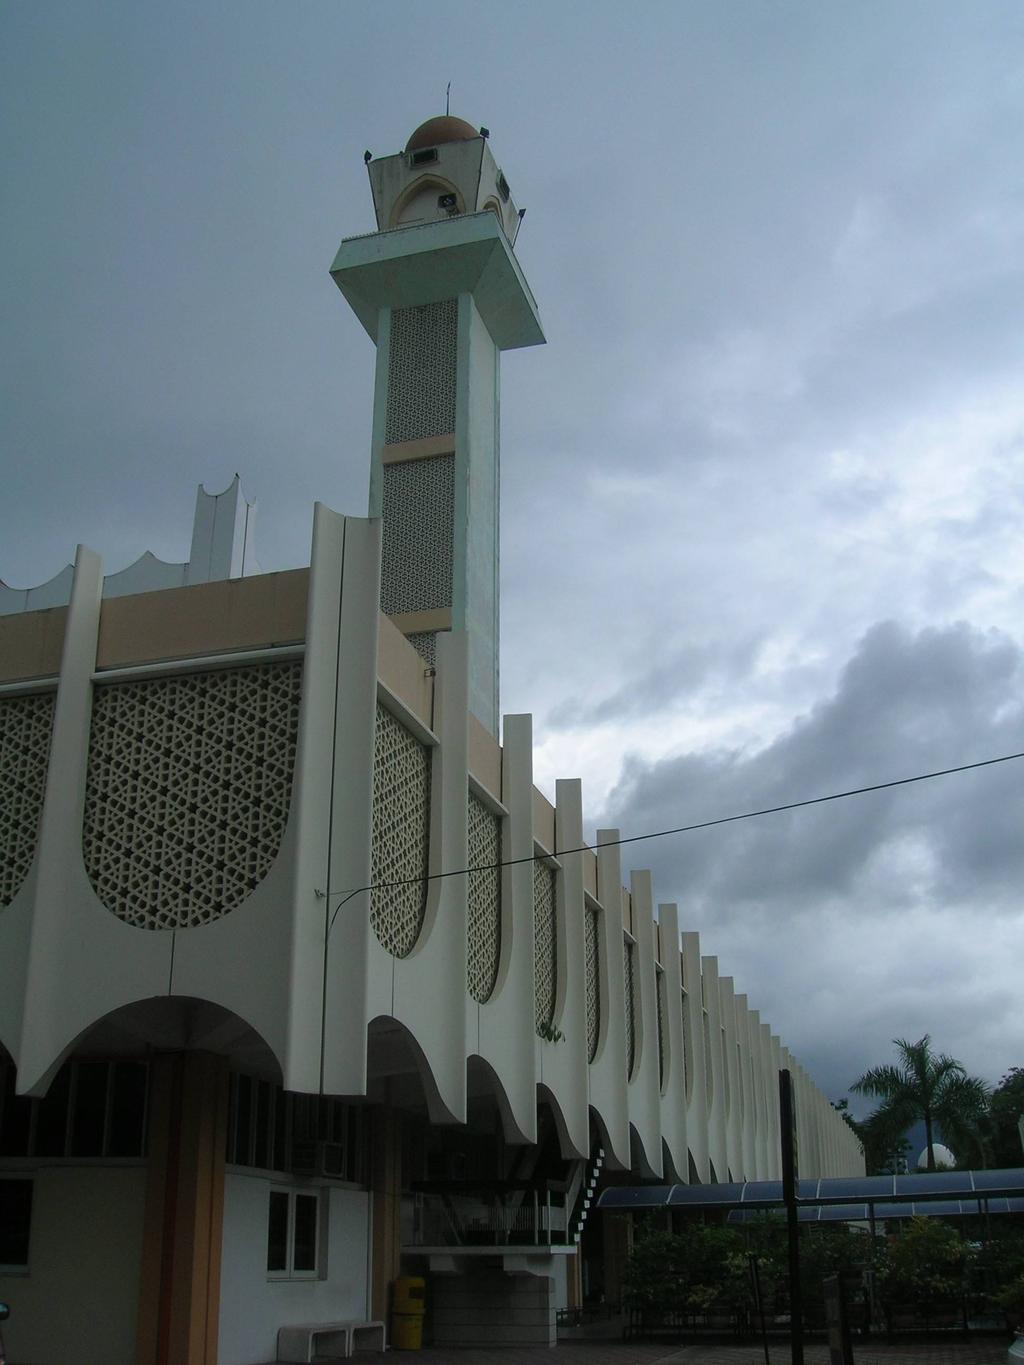 13: Perak State Mosque, 1978 7.3.1 Mosque Overall Design This mosque has a very simple yet practical internal spatial organization.